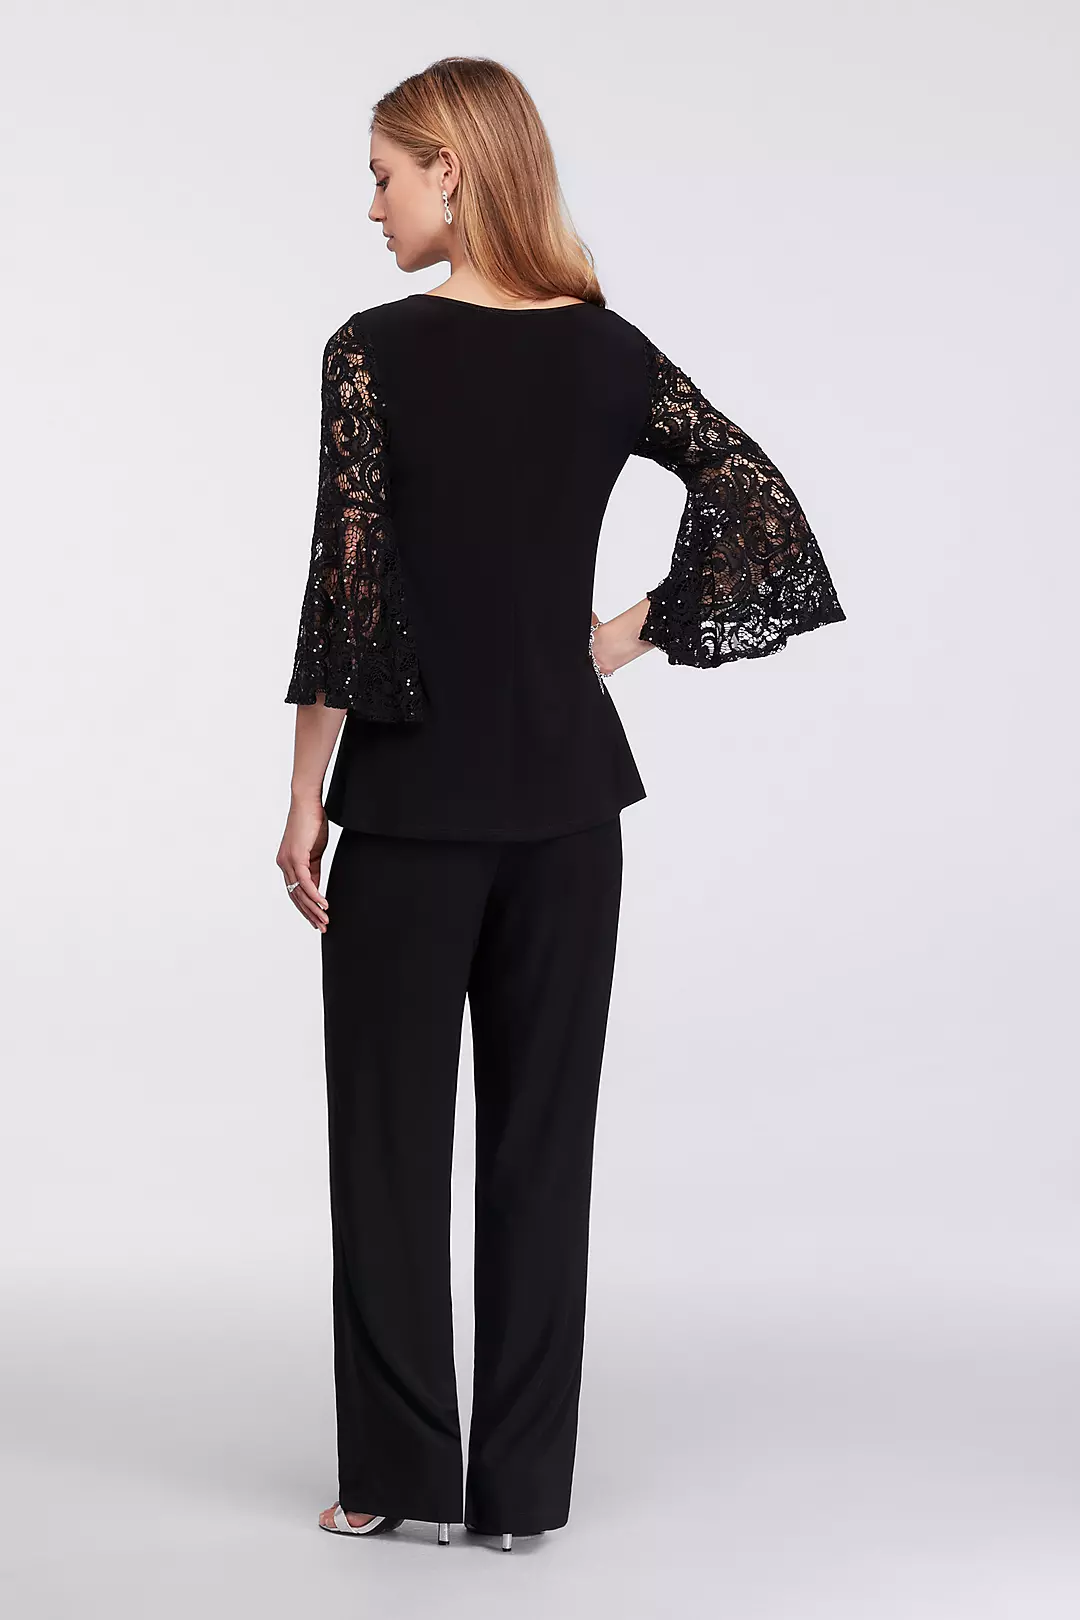 Jersey Two Piece Long Sleeve Pantsuit with Lace Image 2